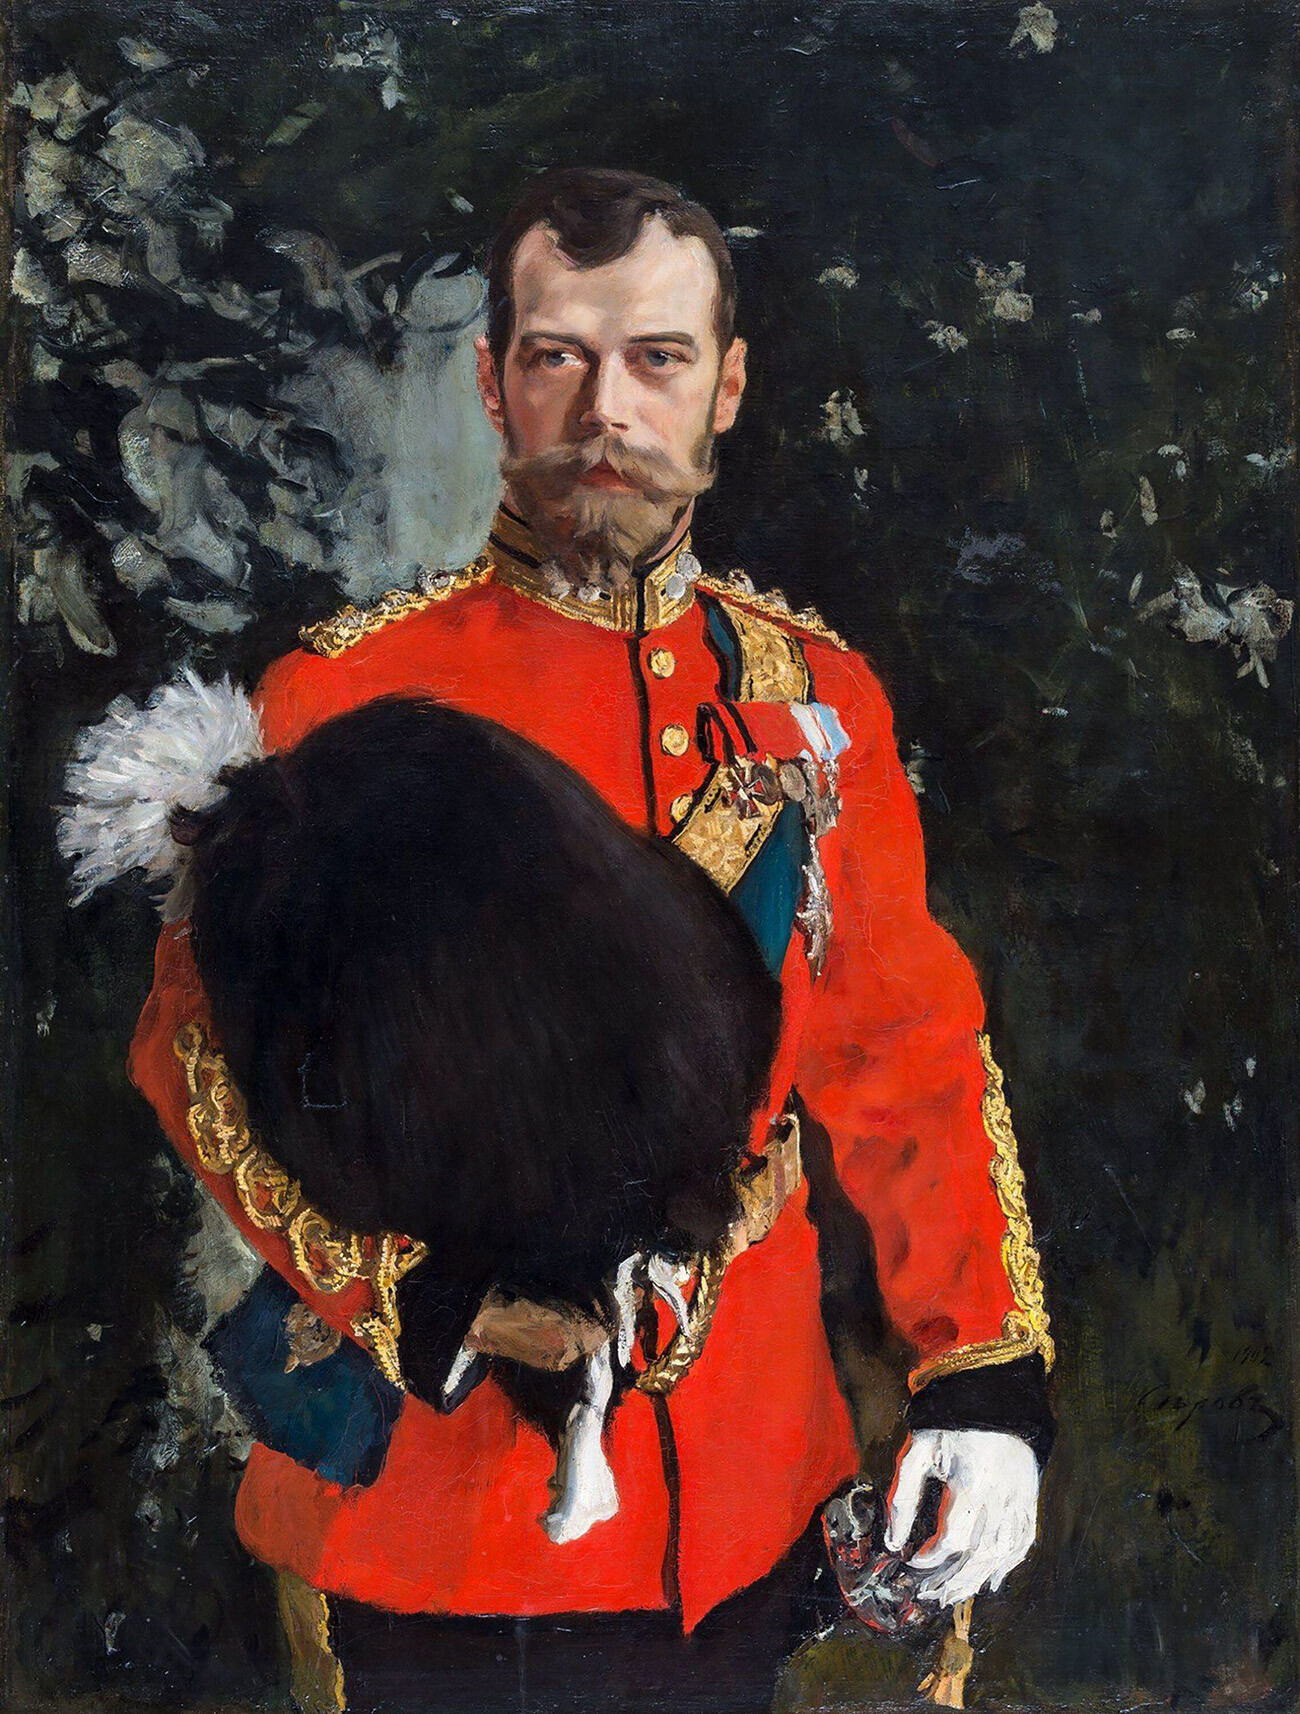  NICHOLAS II OF RUSSIA (1868-1918) Painted By Valentin Serov In 1902 As Colonel-In-Chief Of The 2nd Dragoons (Royal Scots Greys) 